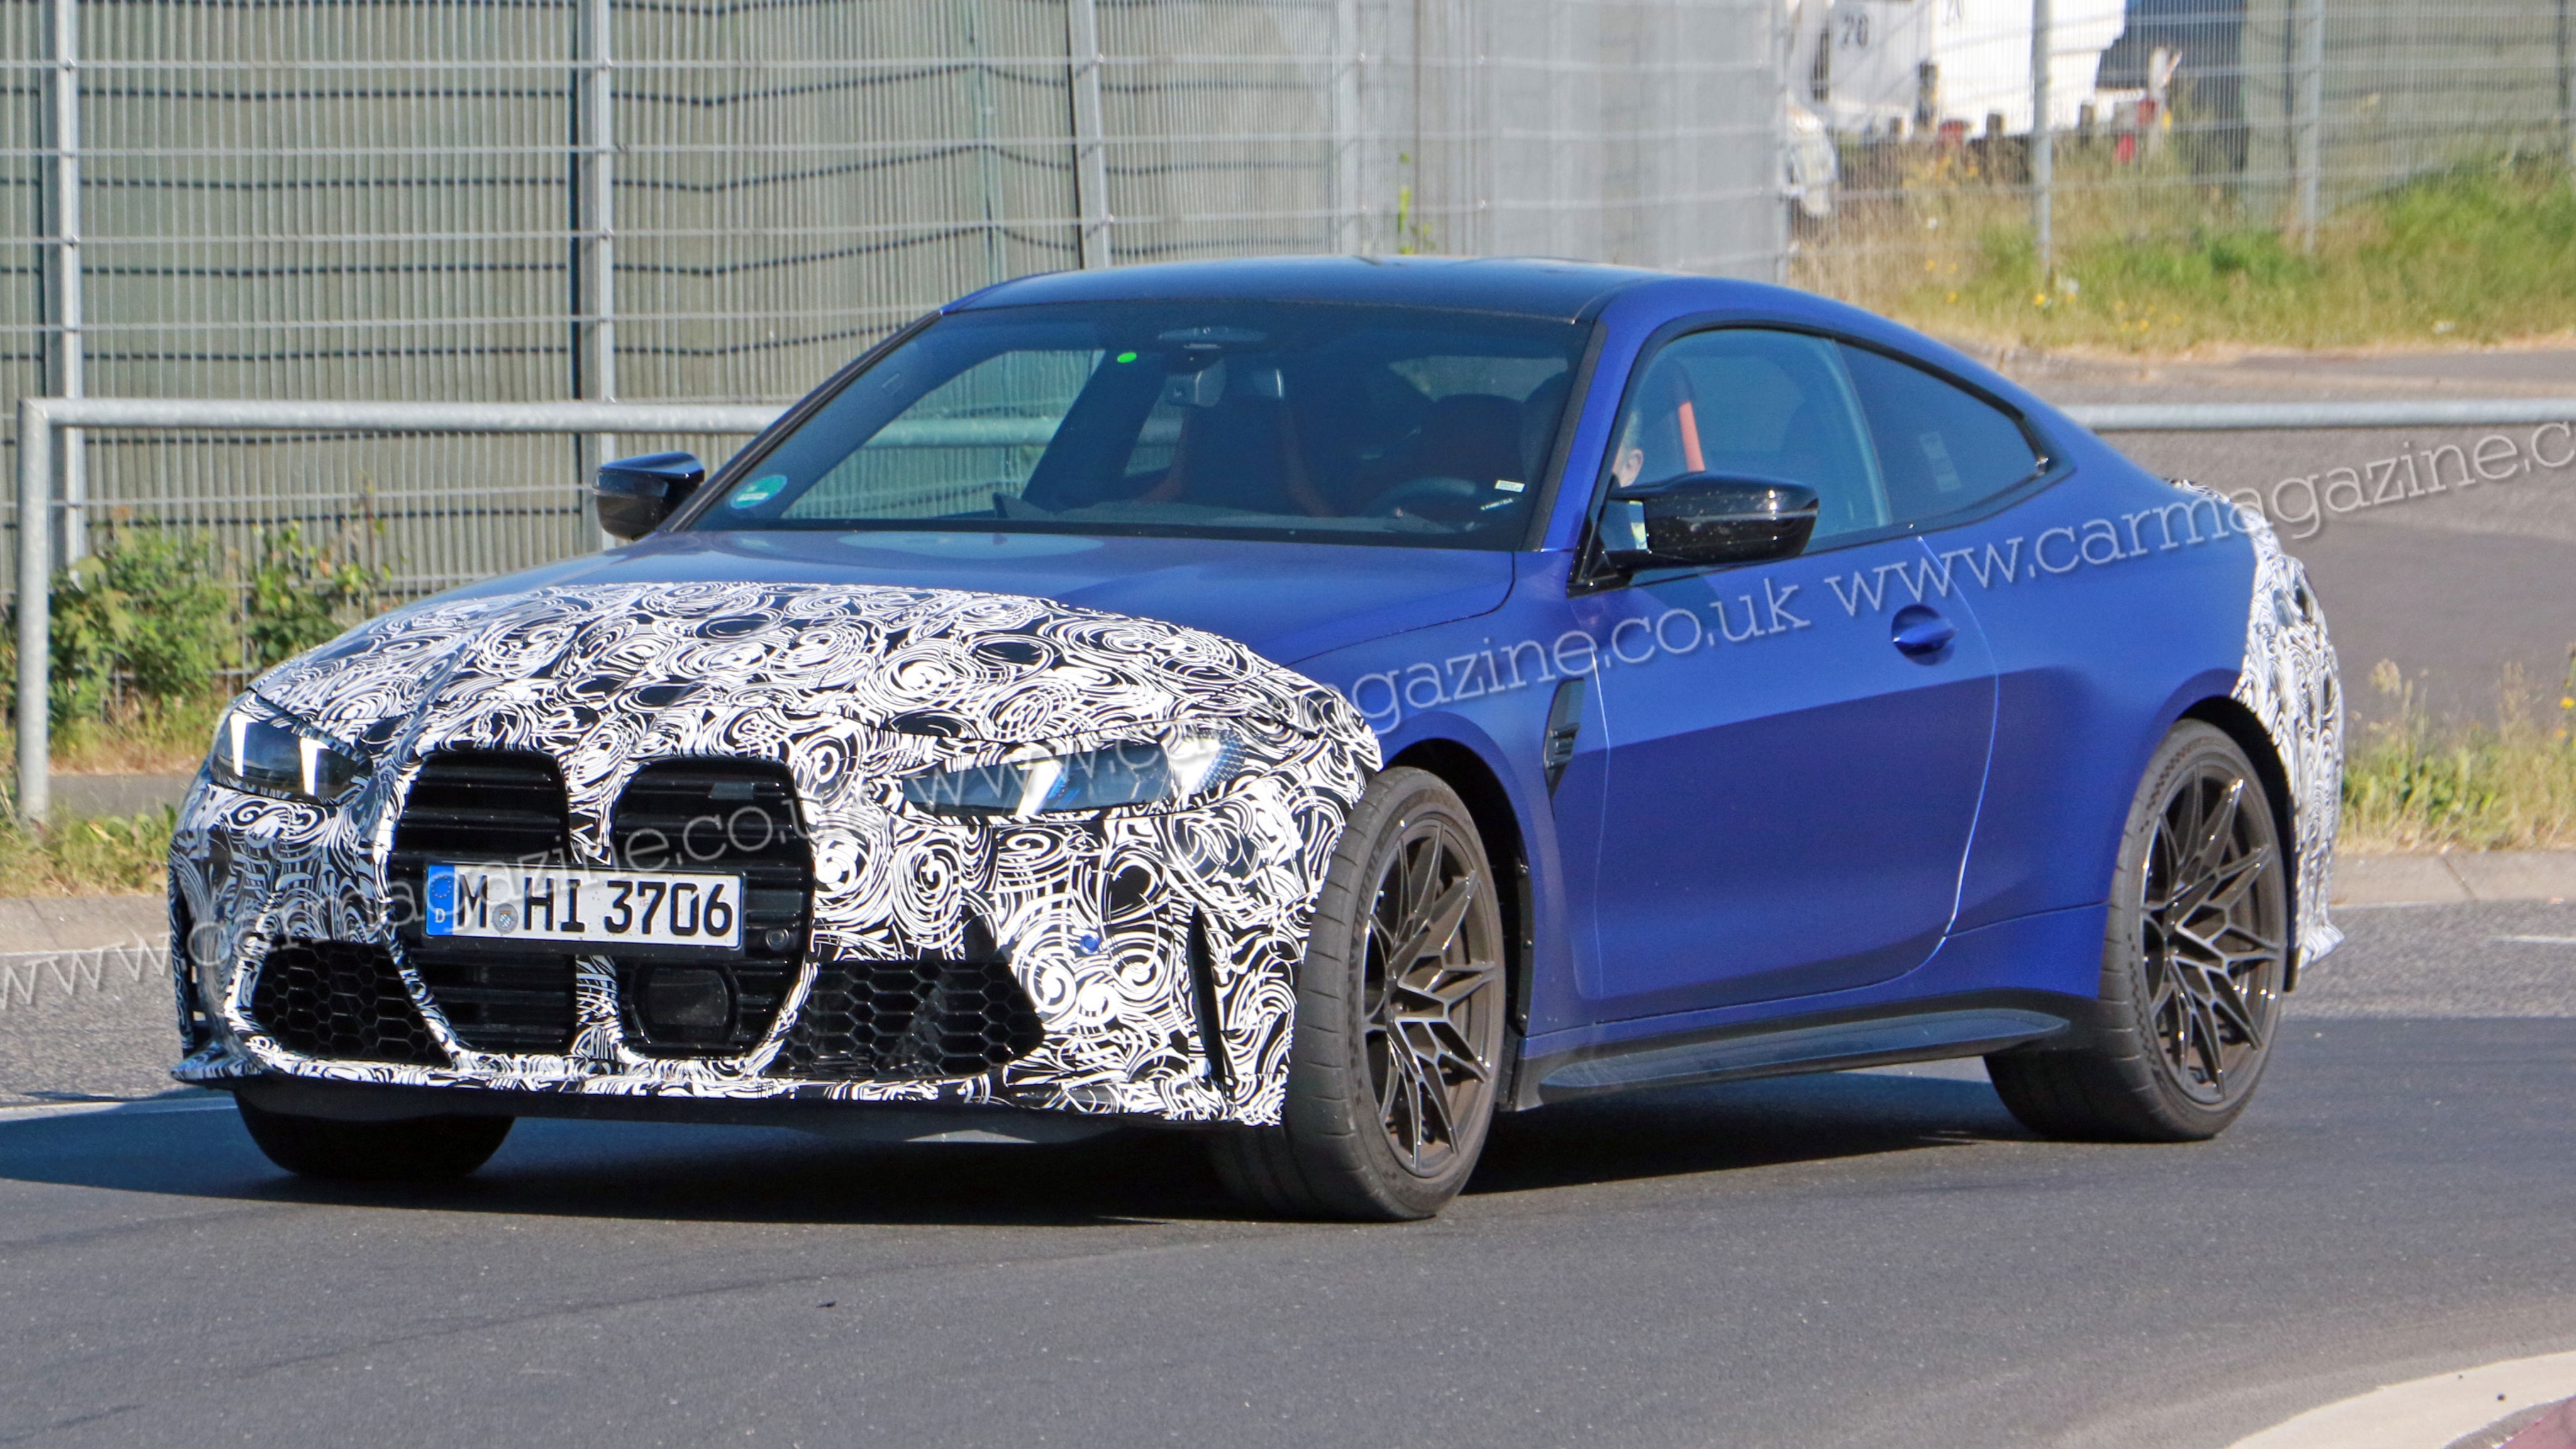 All-new BMW M3: facelift model snapped testing